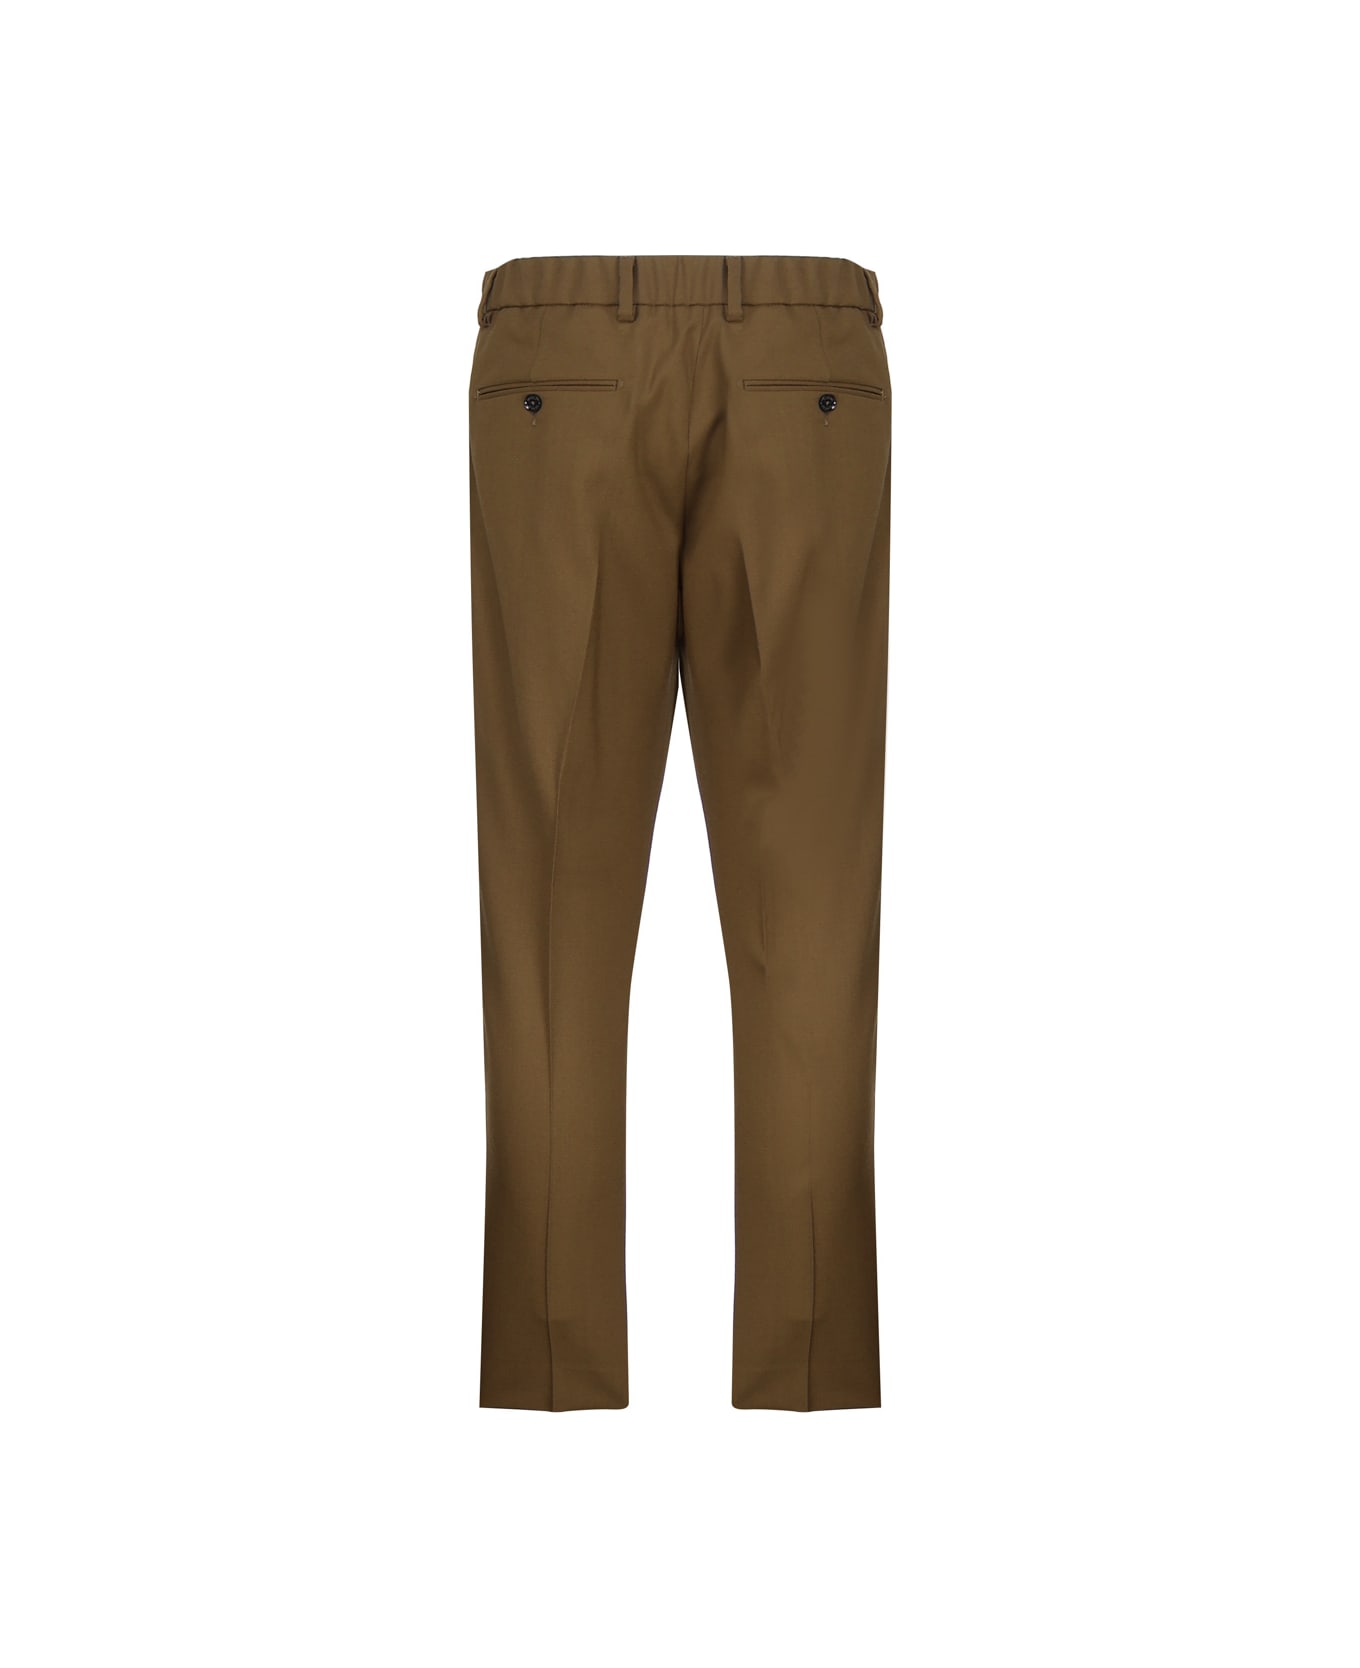 Be Able Riccardo Trousers - Tobacco ボトムス